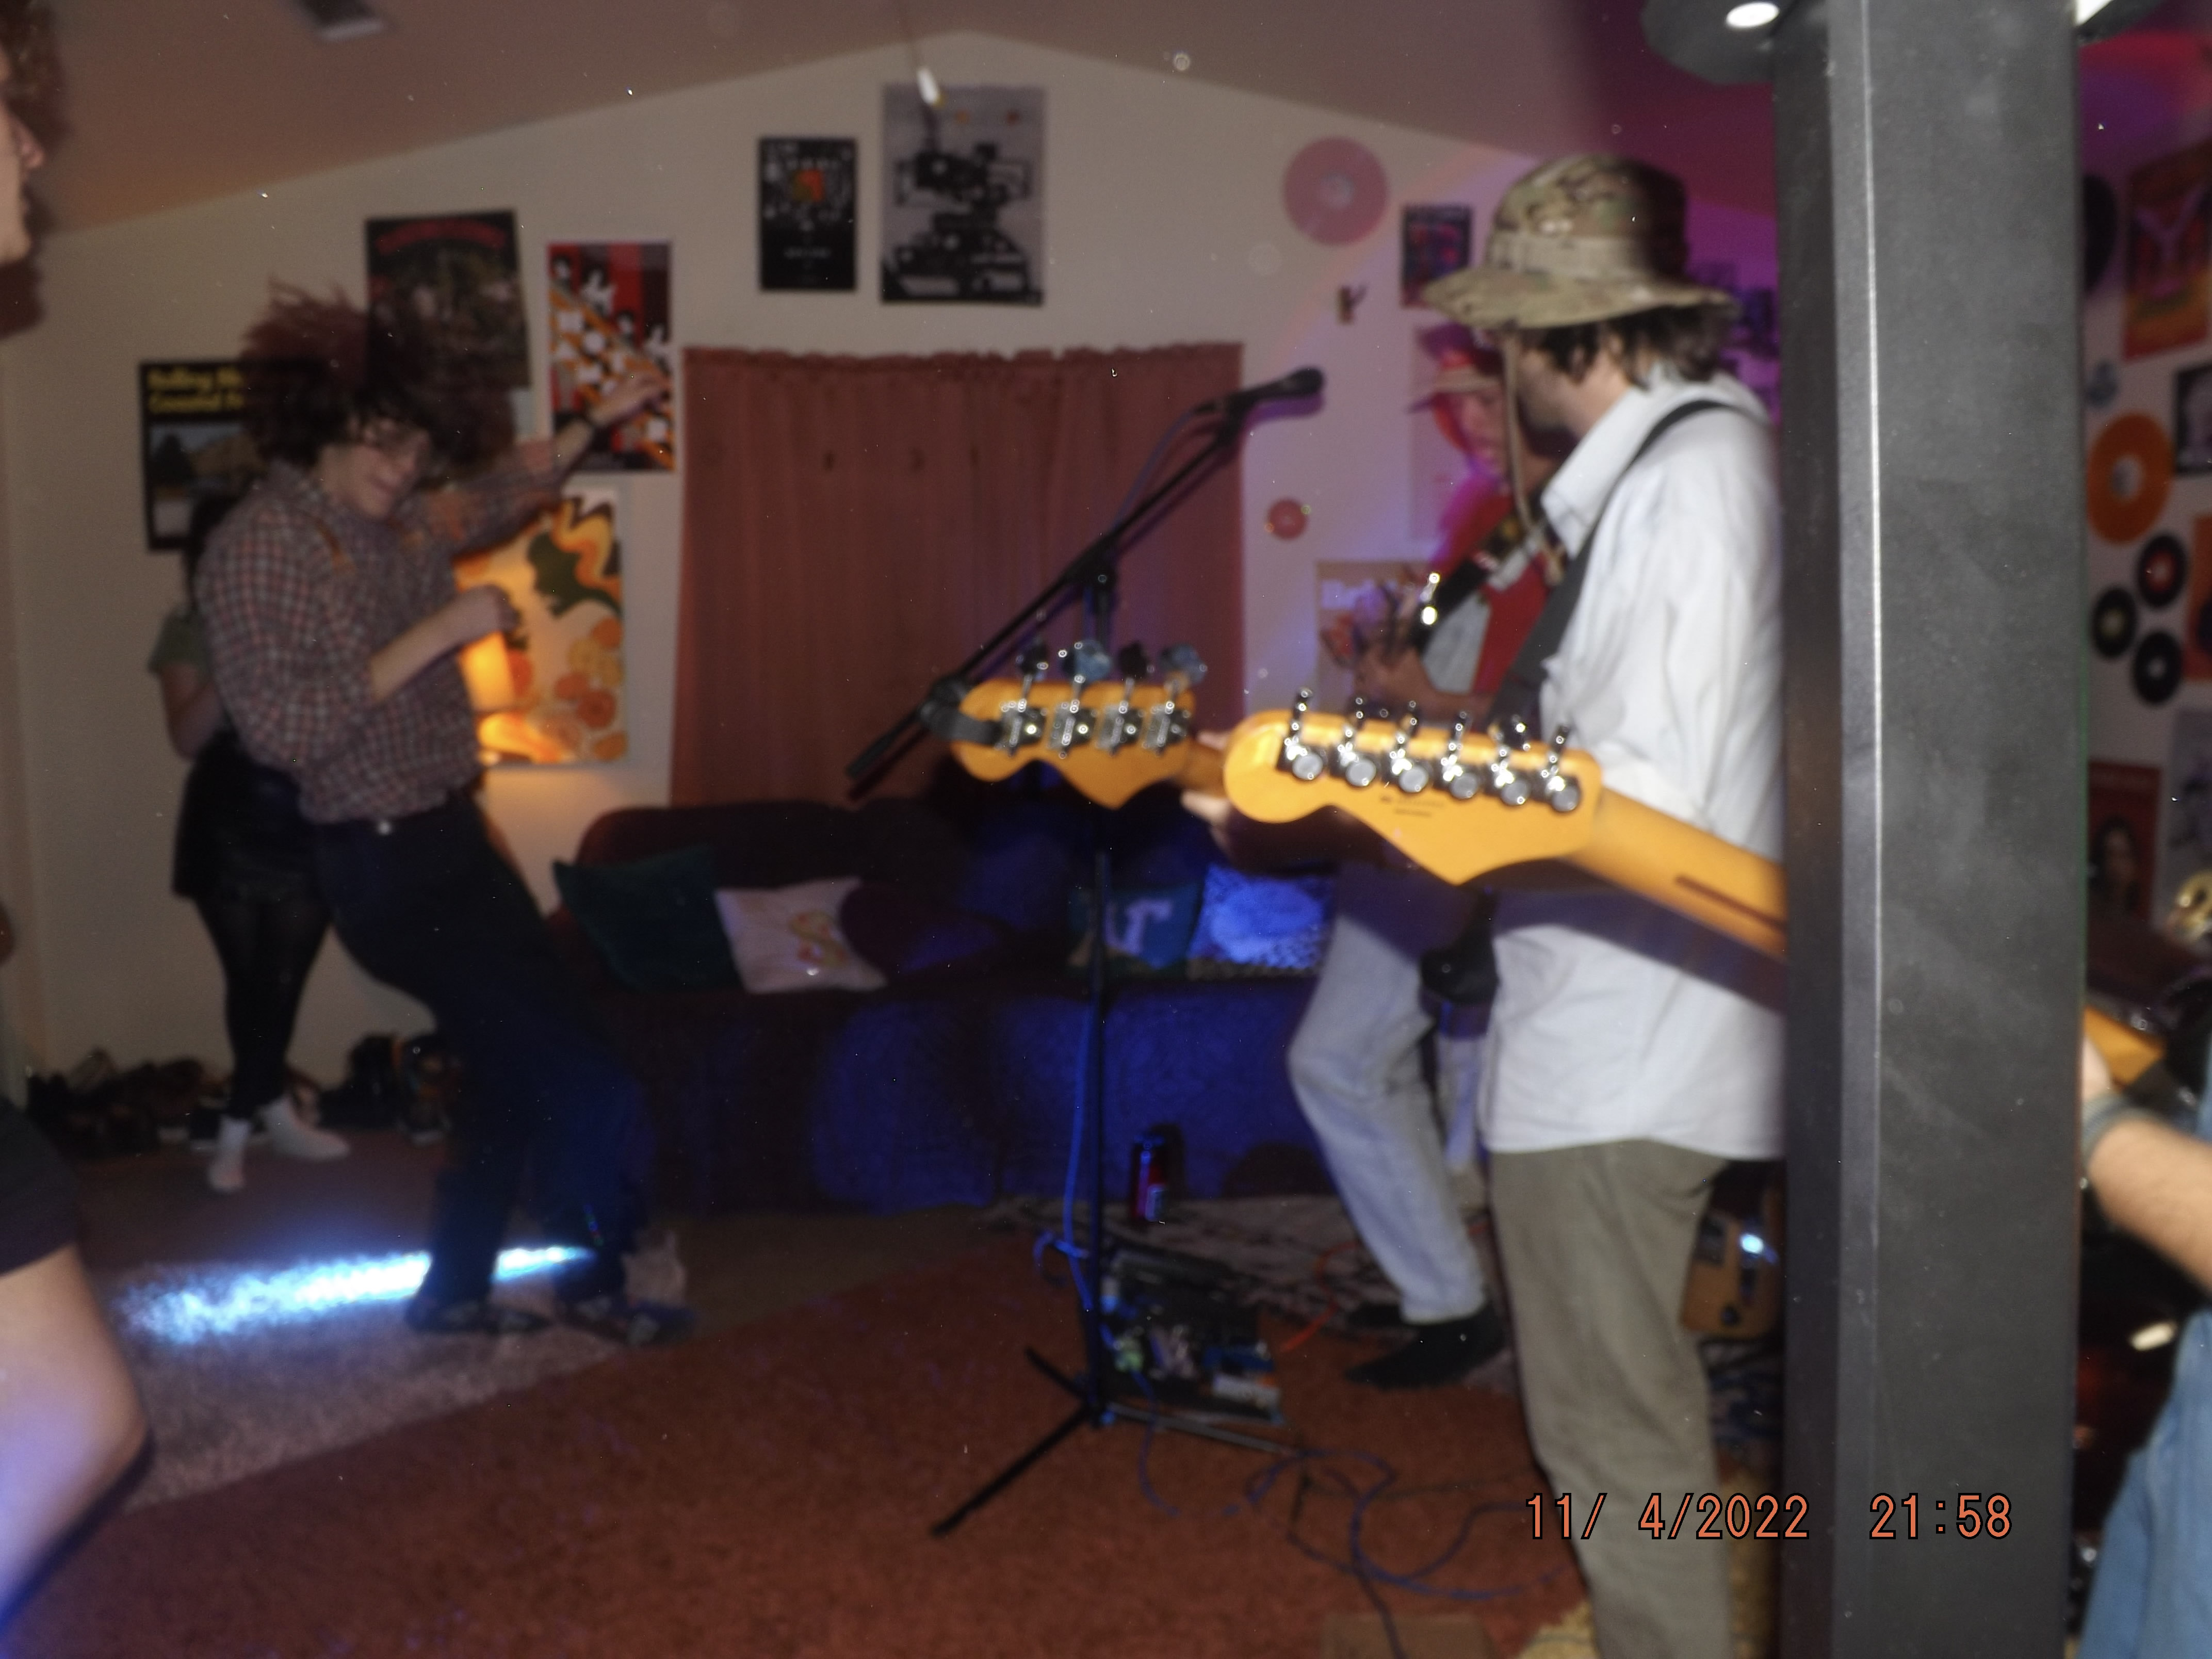  Image features a hazy depiction of Curtis Rowe and Ethan Lugbauer (out of frame) moshing in the living room of Earle’s Basement during Say So’s set. Say So’s West, Cicero, and Russell are opposite Rowe. “11/4/2022 21:58” can be read in the bottom right corner of the image.